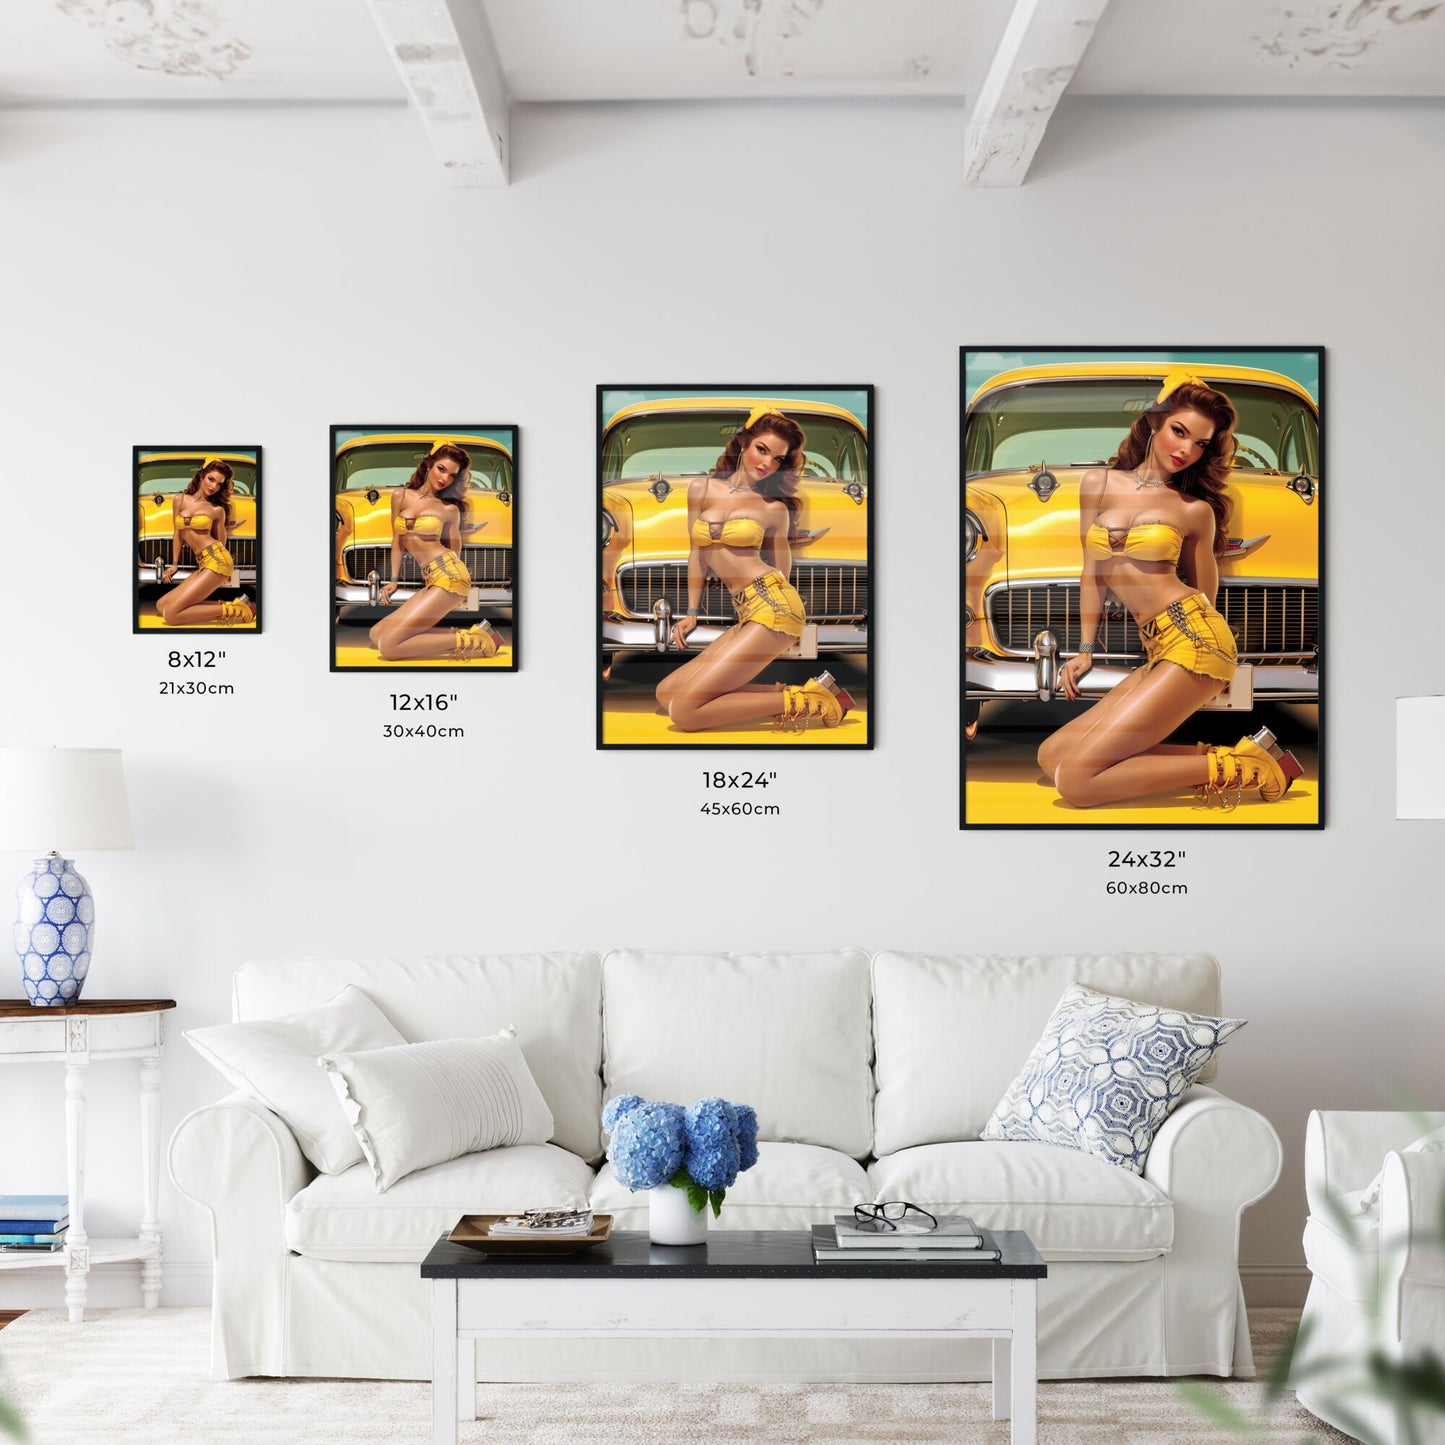 Auto mechanic - Art print of a woman in a yellow garment and shorts posing in front of a yellow car Default Title